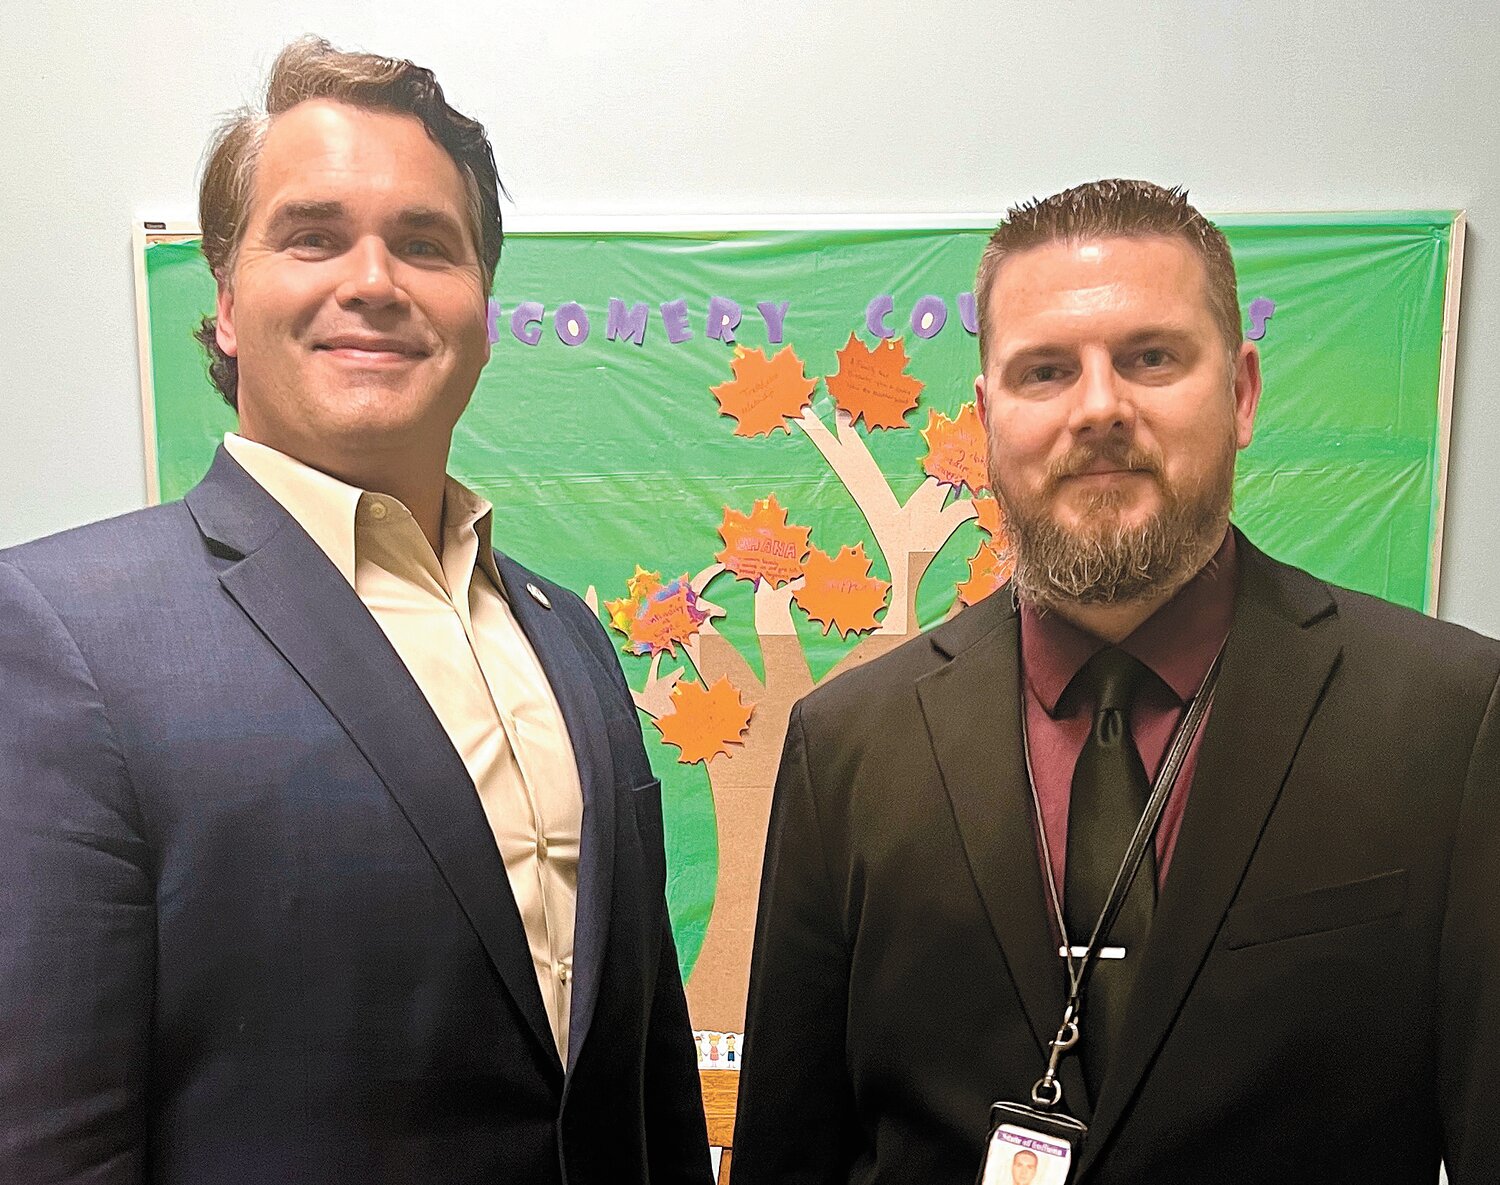 State Rep. Beau Baird (R-Greencastle), left, meets with Justin Dearinger, director of the Montgomery County Department of Child Services office Nov. 9 to learn more about local efforts to resolve child neglect.